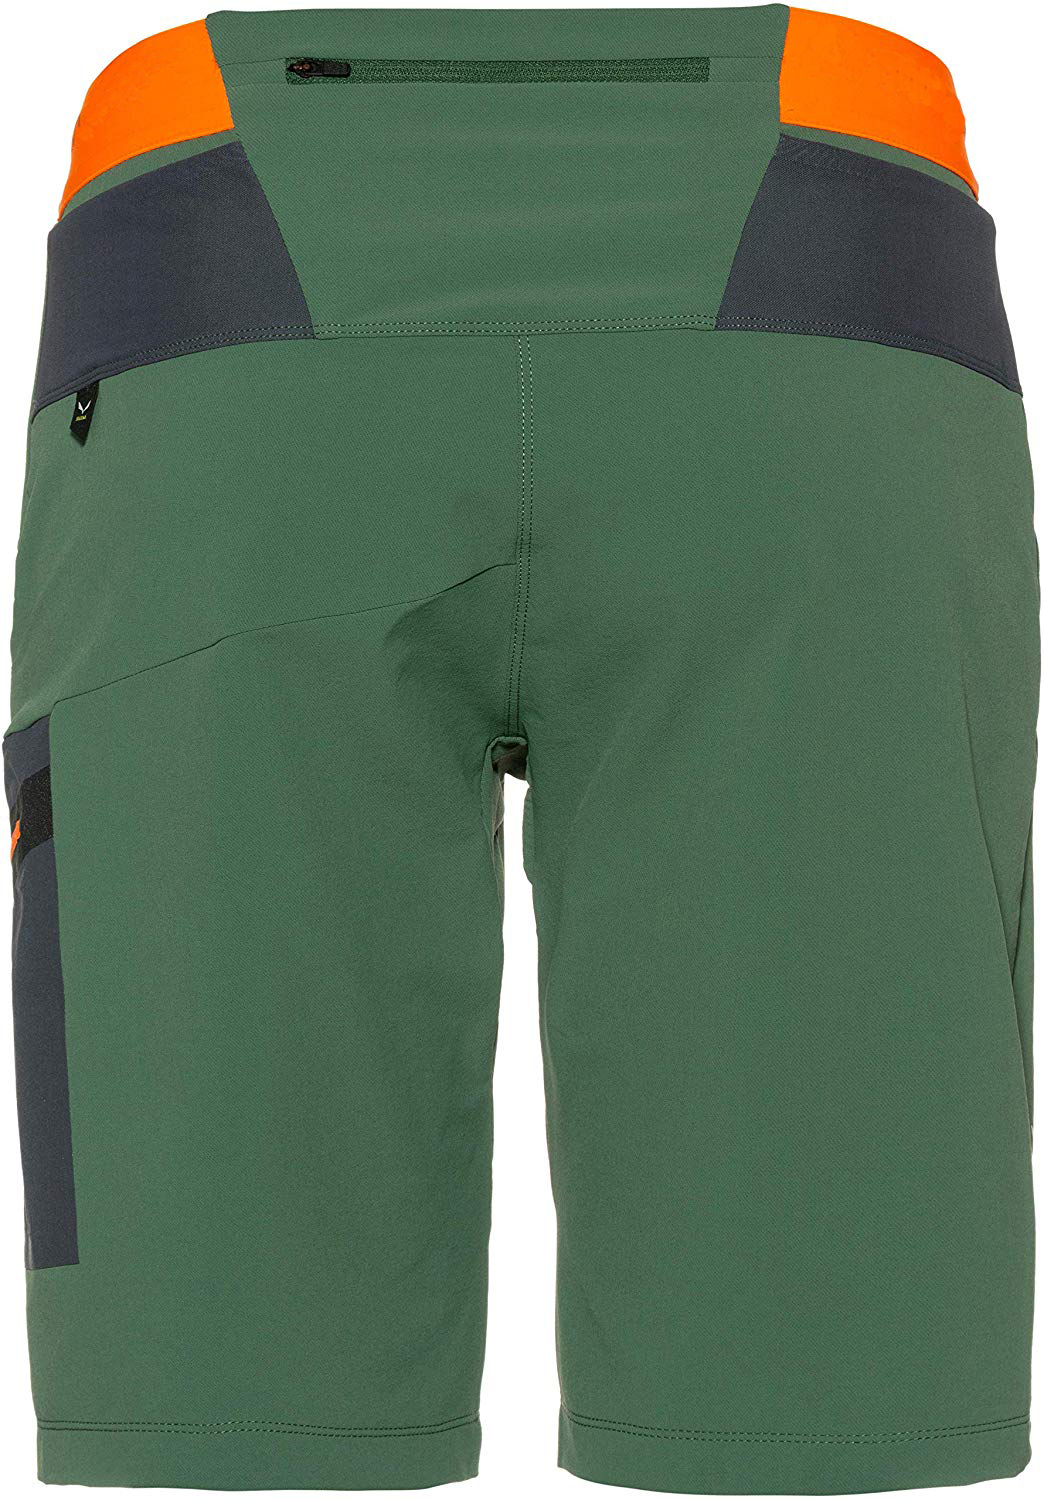 Sports Outdoor Men Hiking Shorts Trousers 